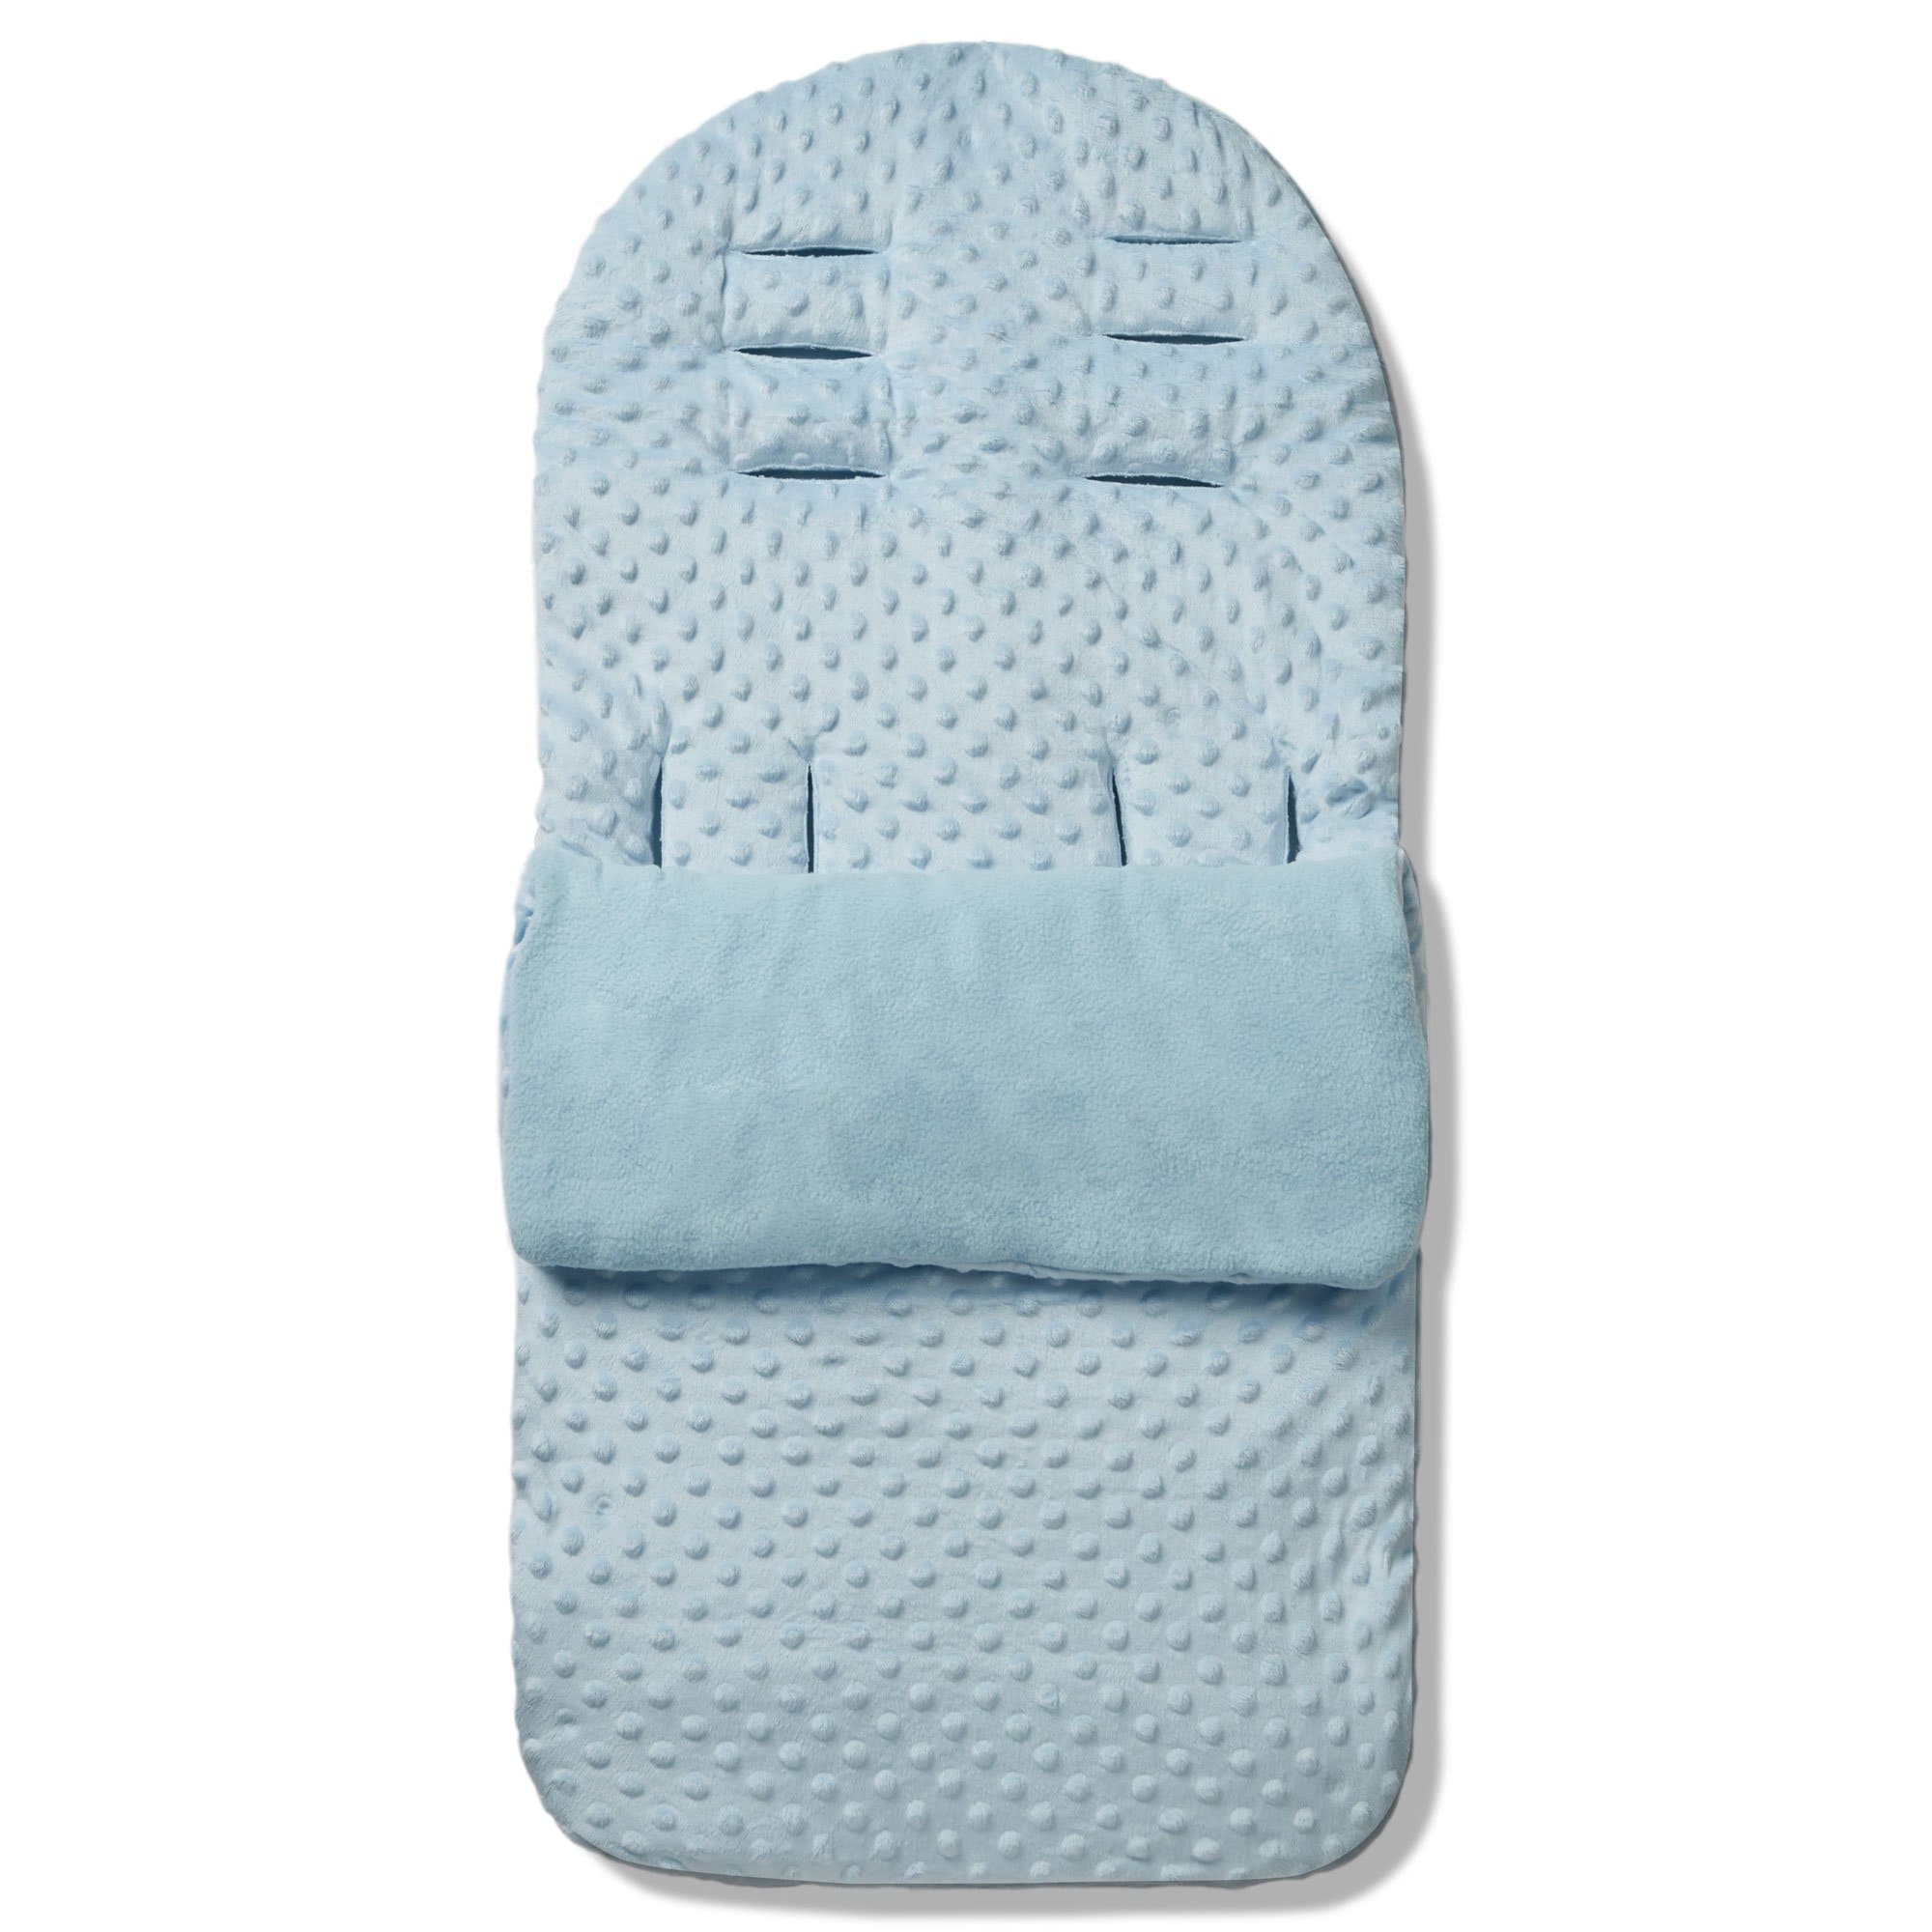 Dimple Footmuff / Cosy Toes Compatible with Gesslein - For Your Little One